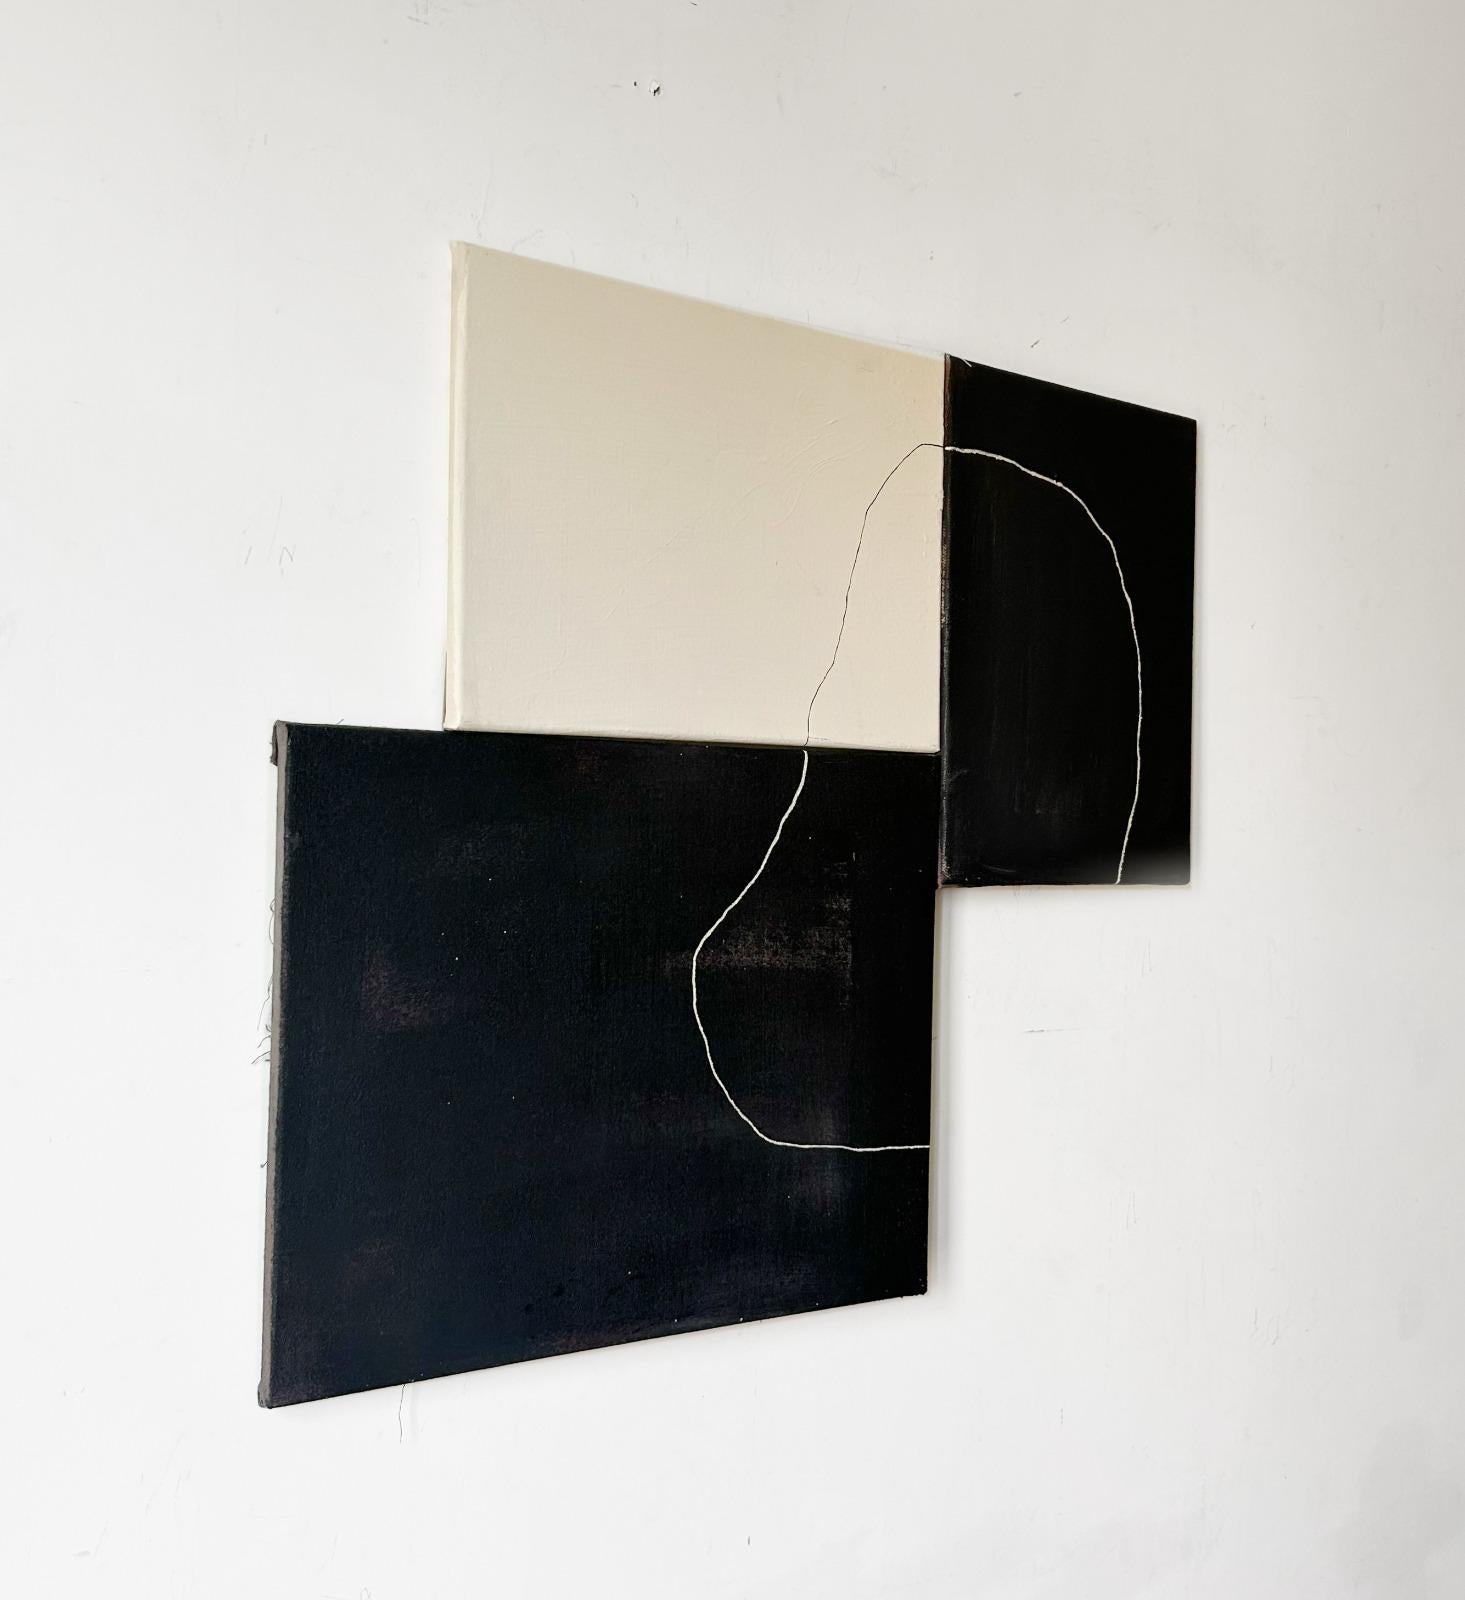 Triptych artwork by Alicia Gimeno, (Barcelona, 1989) Born into a family of engineers where the technical understanding of space was the norm, Gimeno kept her taste for abstraction and added a dose of play and creative freedom. His works —both visual